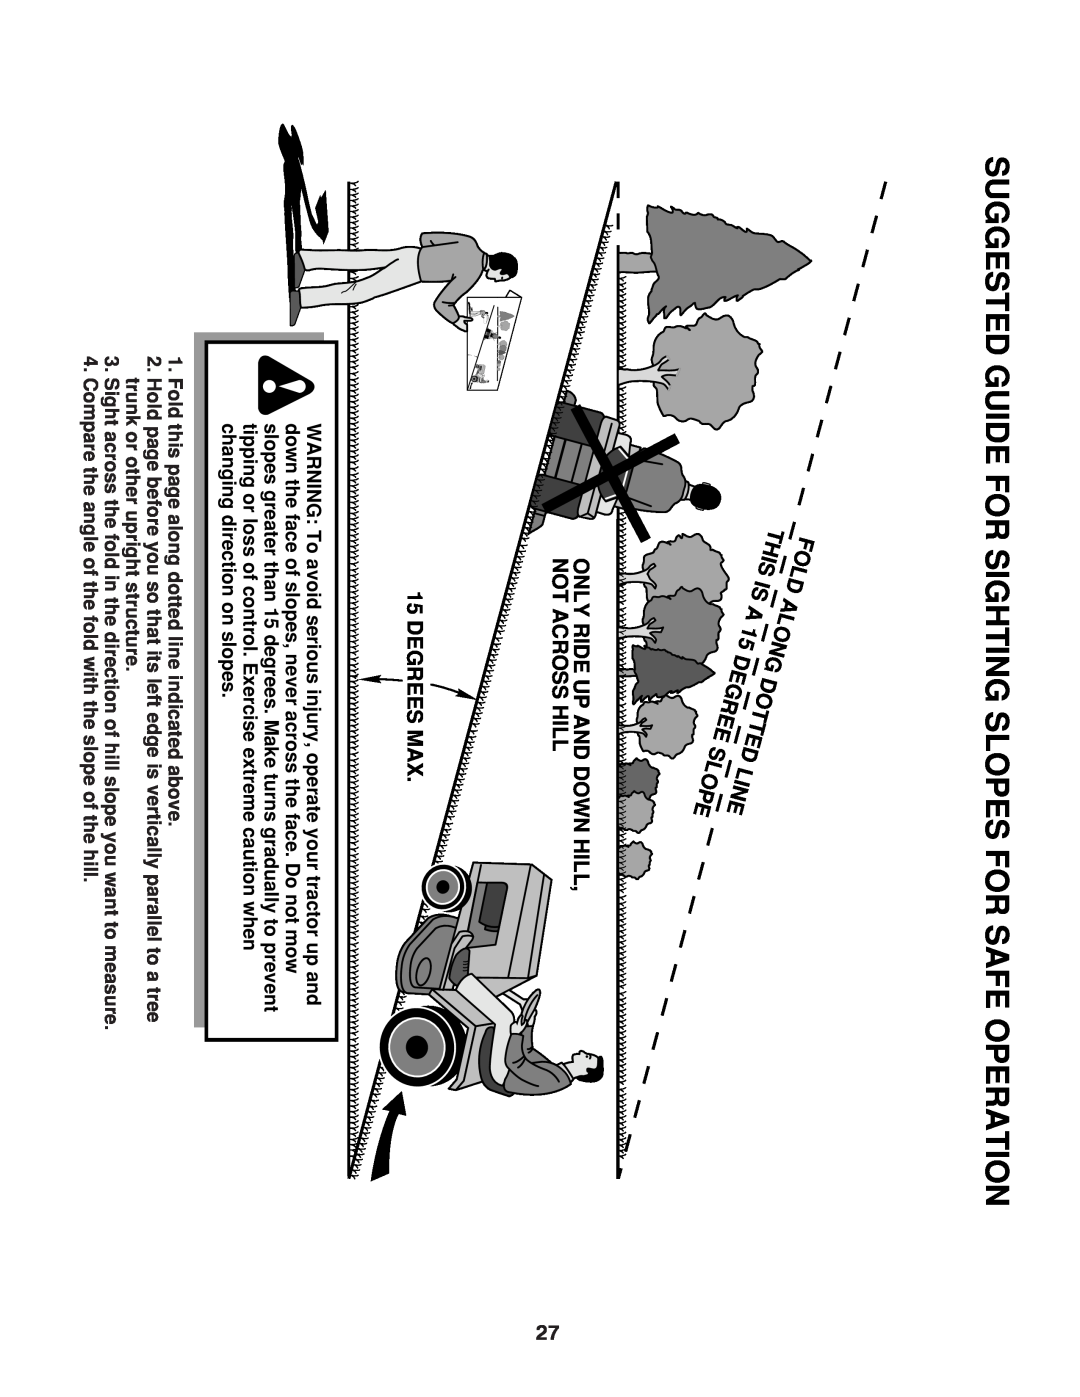 Poulan 438511, PO14542LT, 96012011200 manual Suggested Guide For Sighting Slopes For Safe Operation 